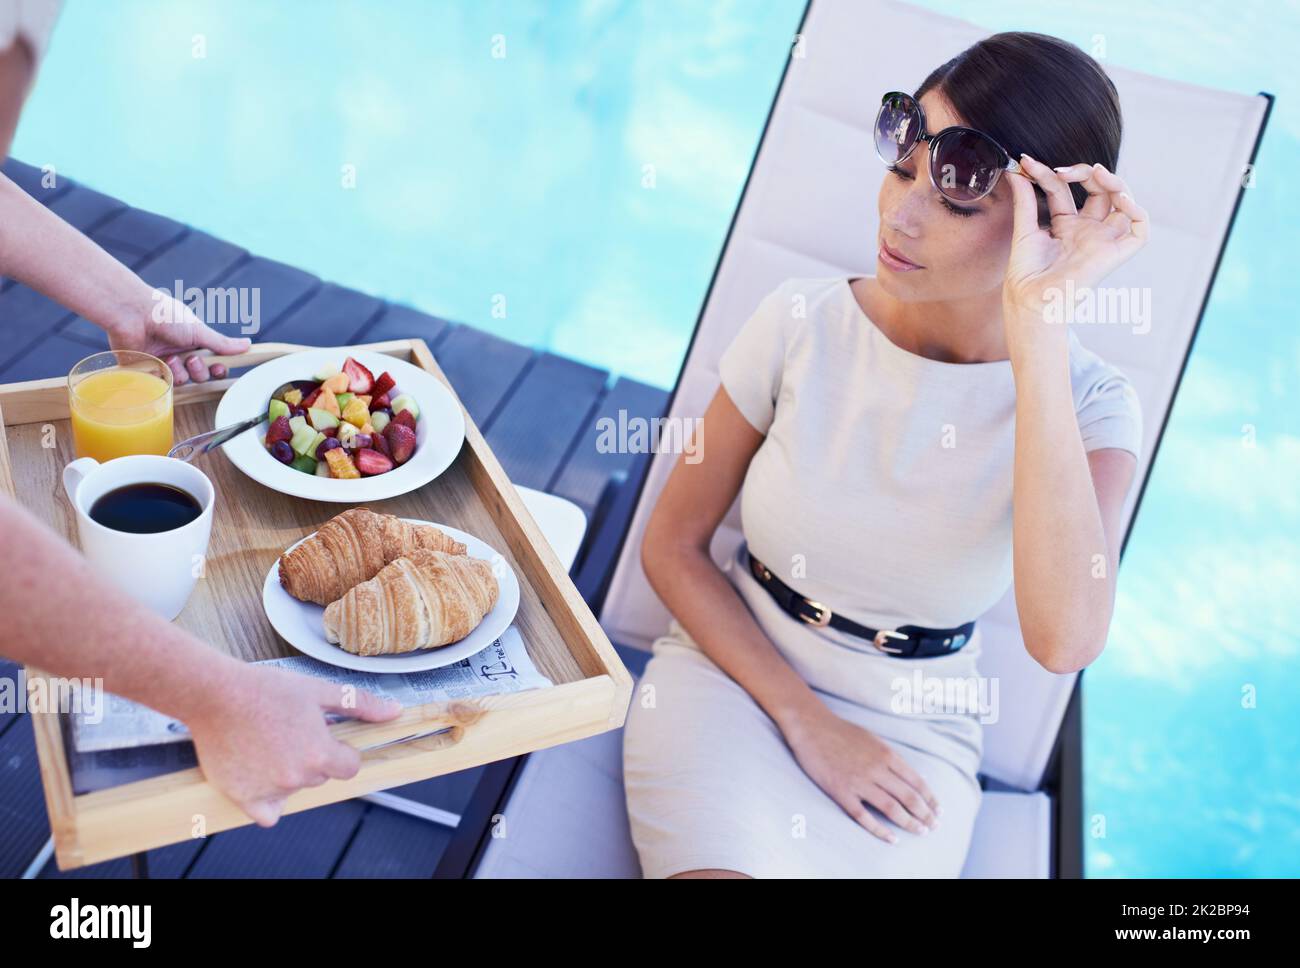 Relaxing while on holiday. A posh young woman looking dubiously at the food brought to her. Stock Photo